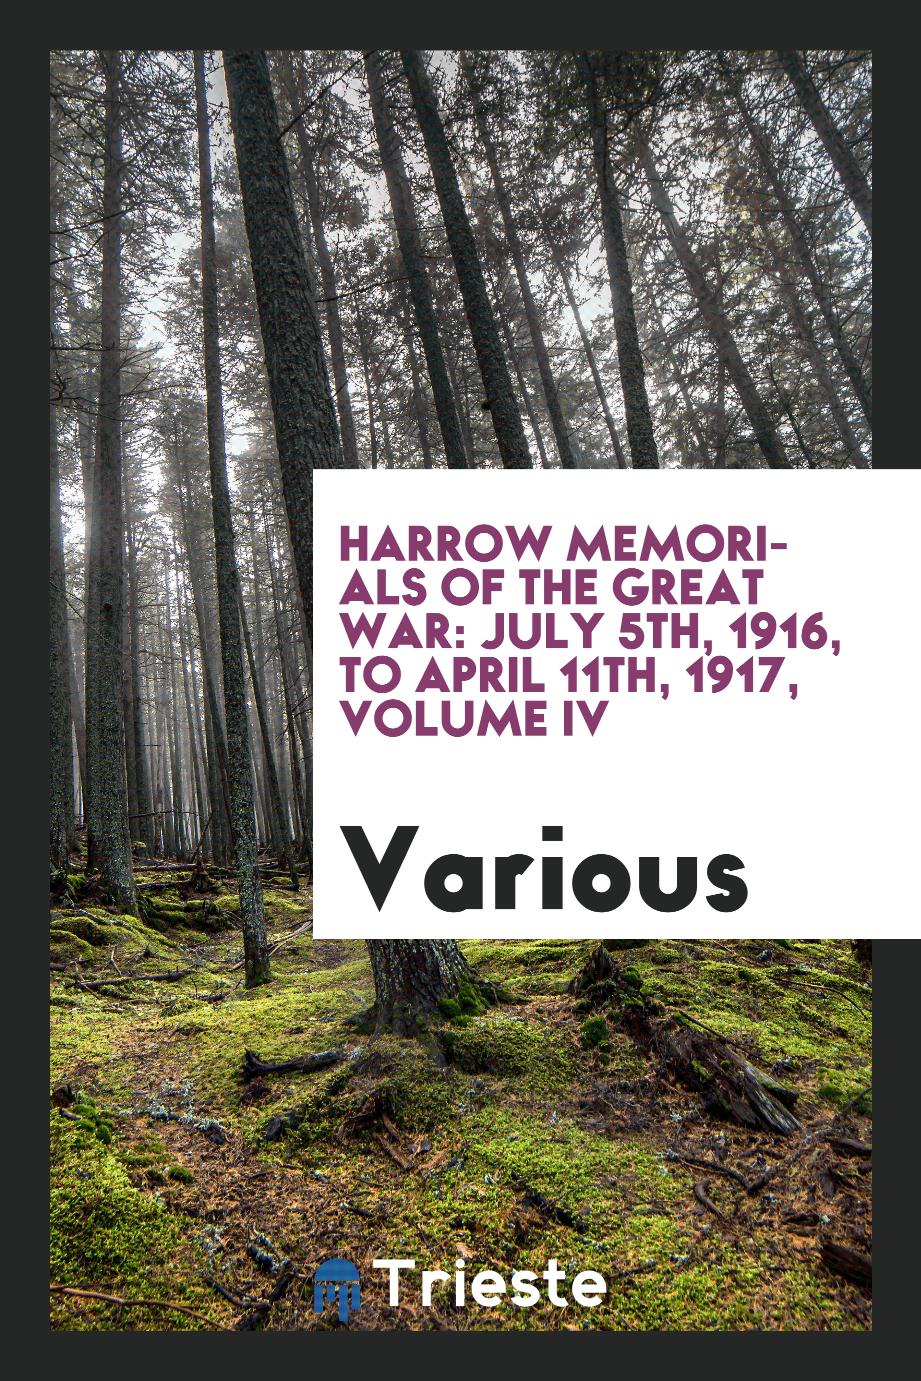 Harrow memorials of the great war: july 5th, 1916, to april 11th, 1917, volume IV